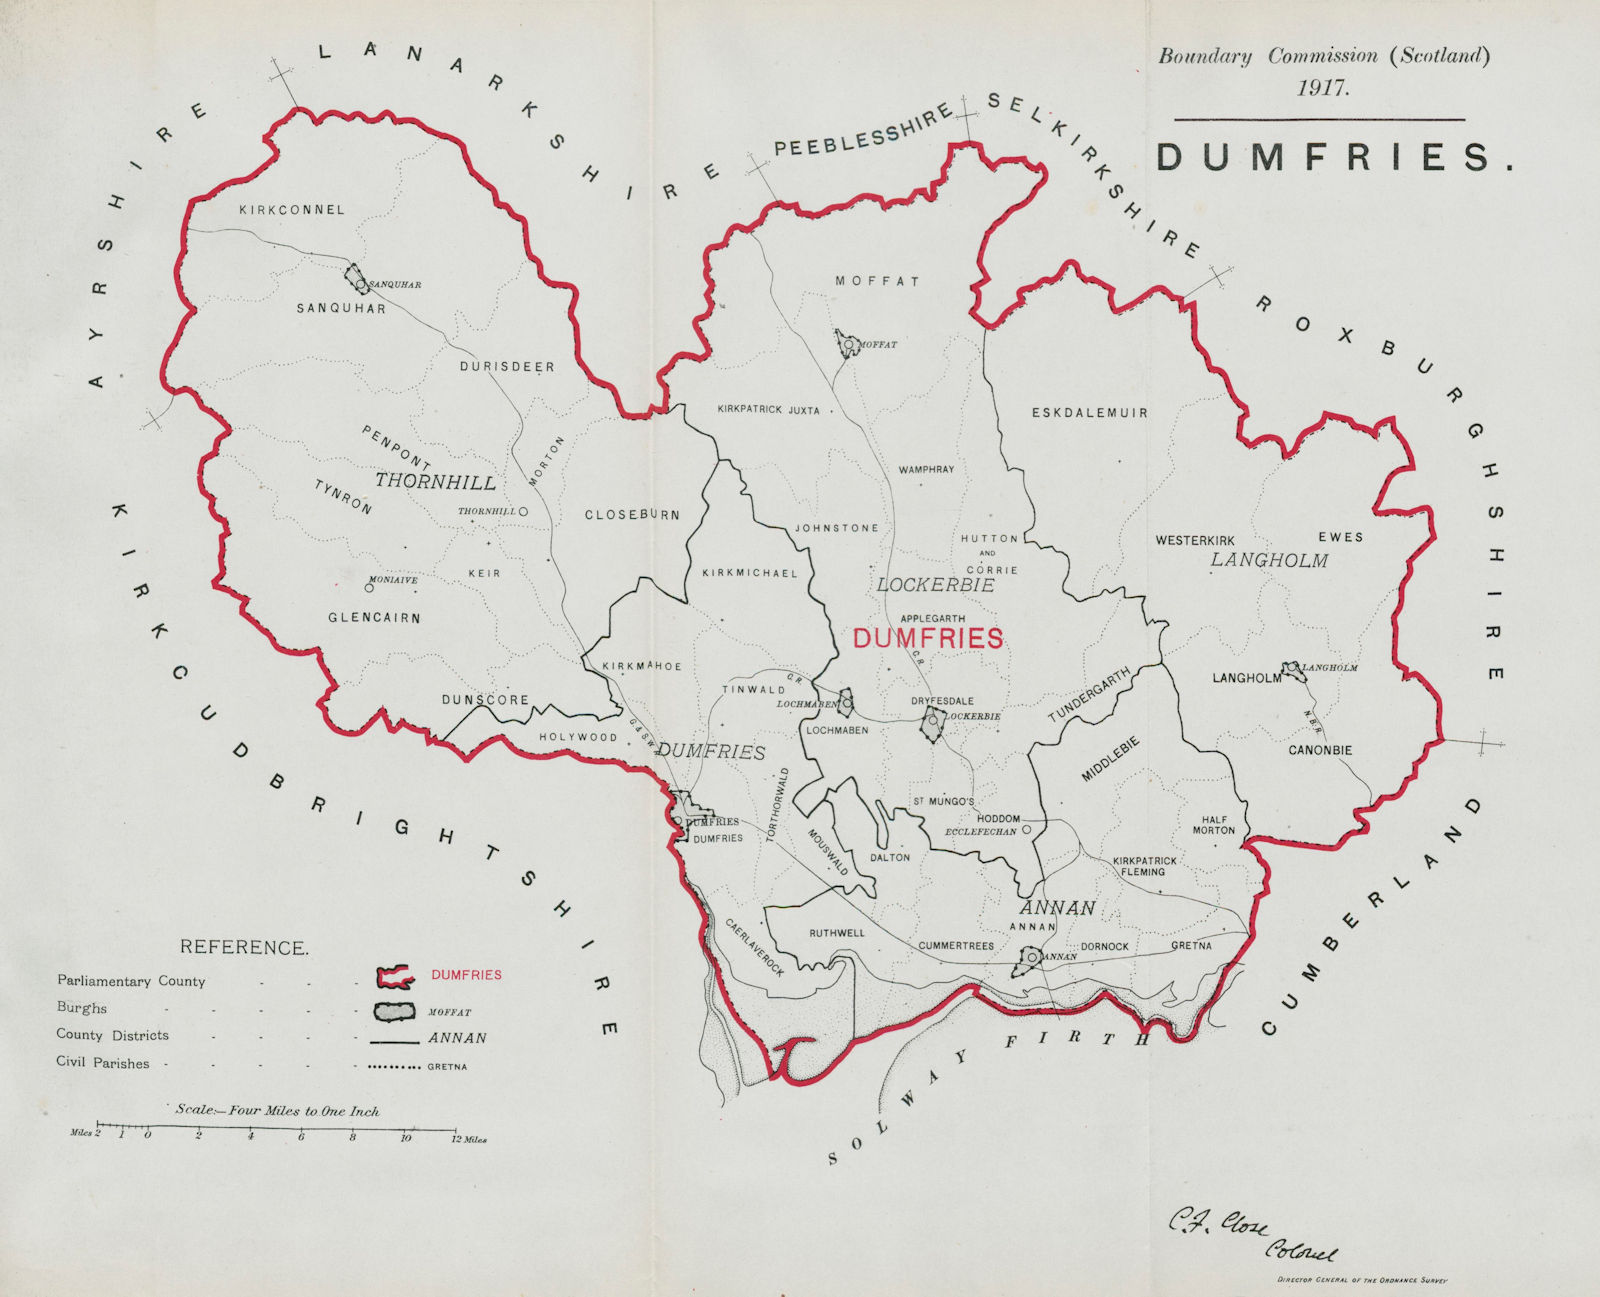 Dumfries Parliamentary County. Scotland. BOUNDARY COMMISSION. Close 1917 map